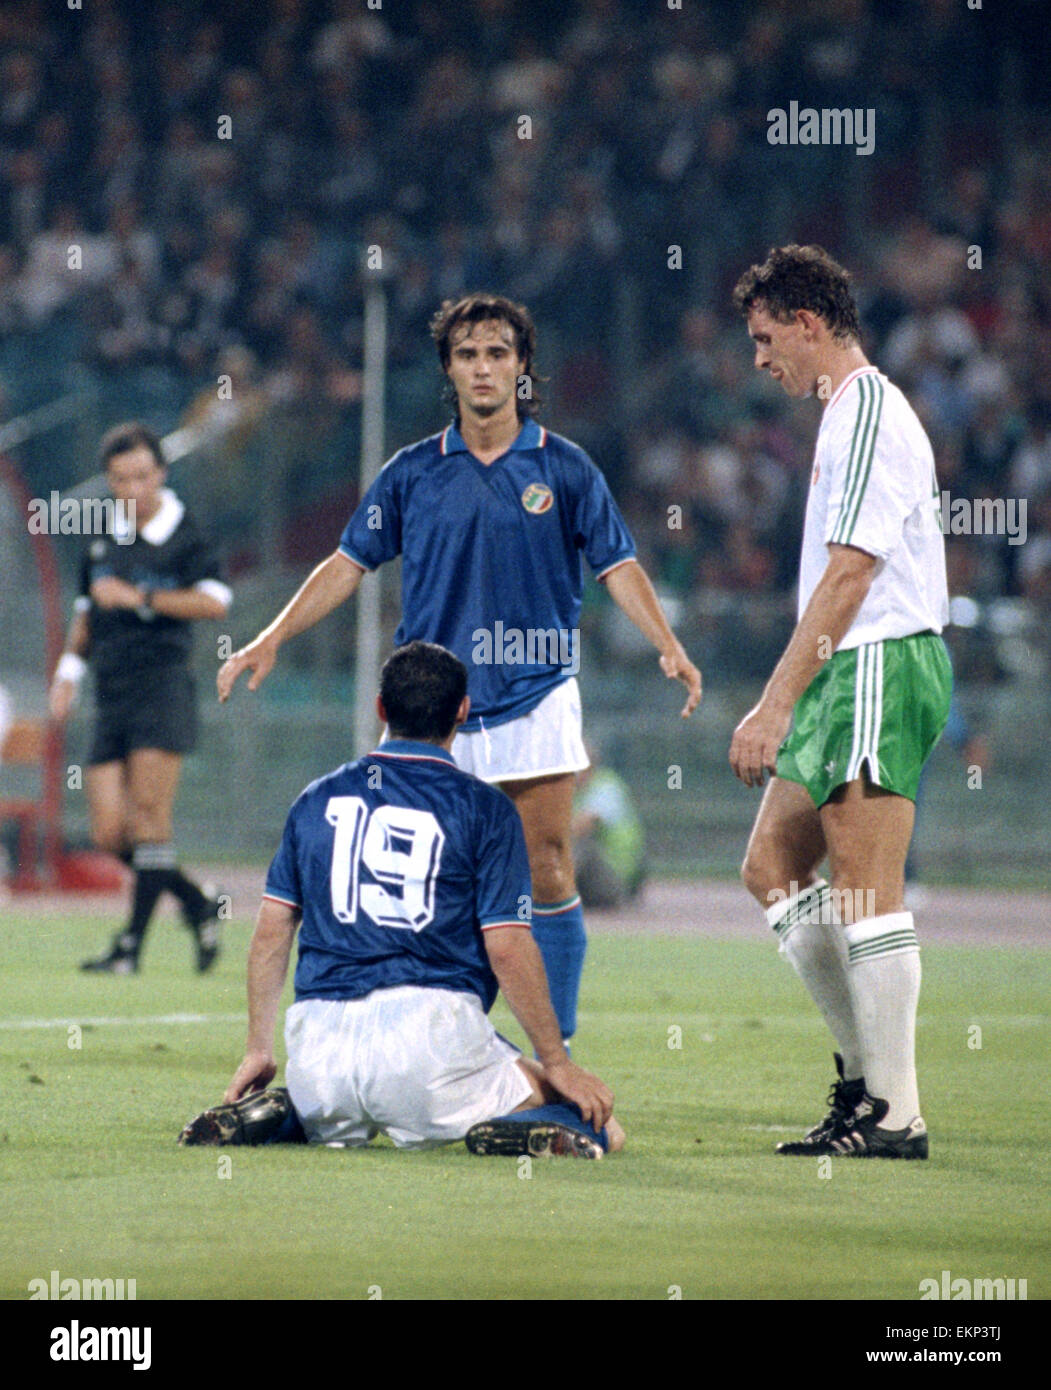 World Cup Quarter Final match in Rome, Italy. Italy 1 v Republic of Ireland 0. Italy's Giuseppe Giannini and Salvatore Schillaci. 30th June 1990. Stock Photo